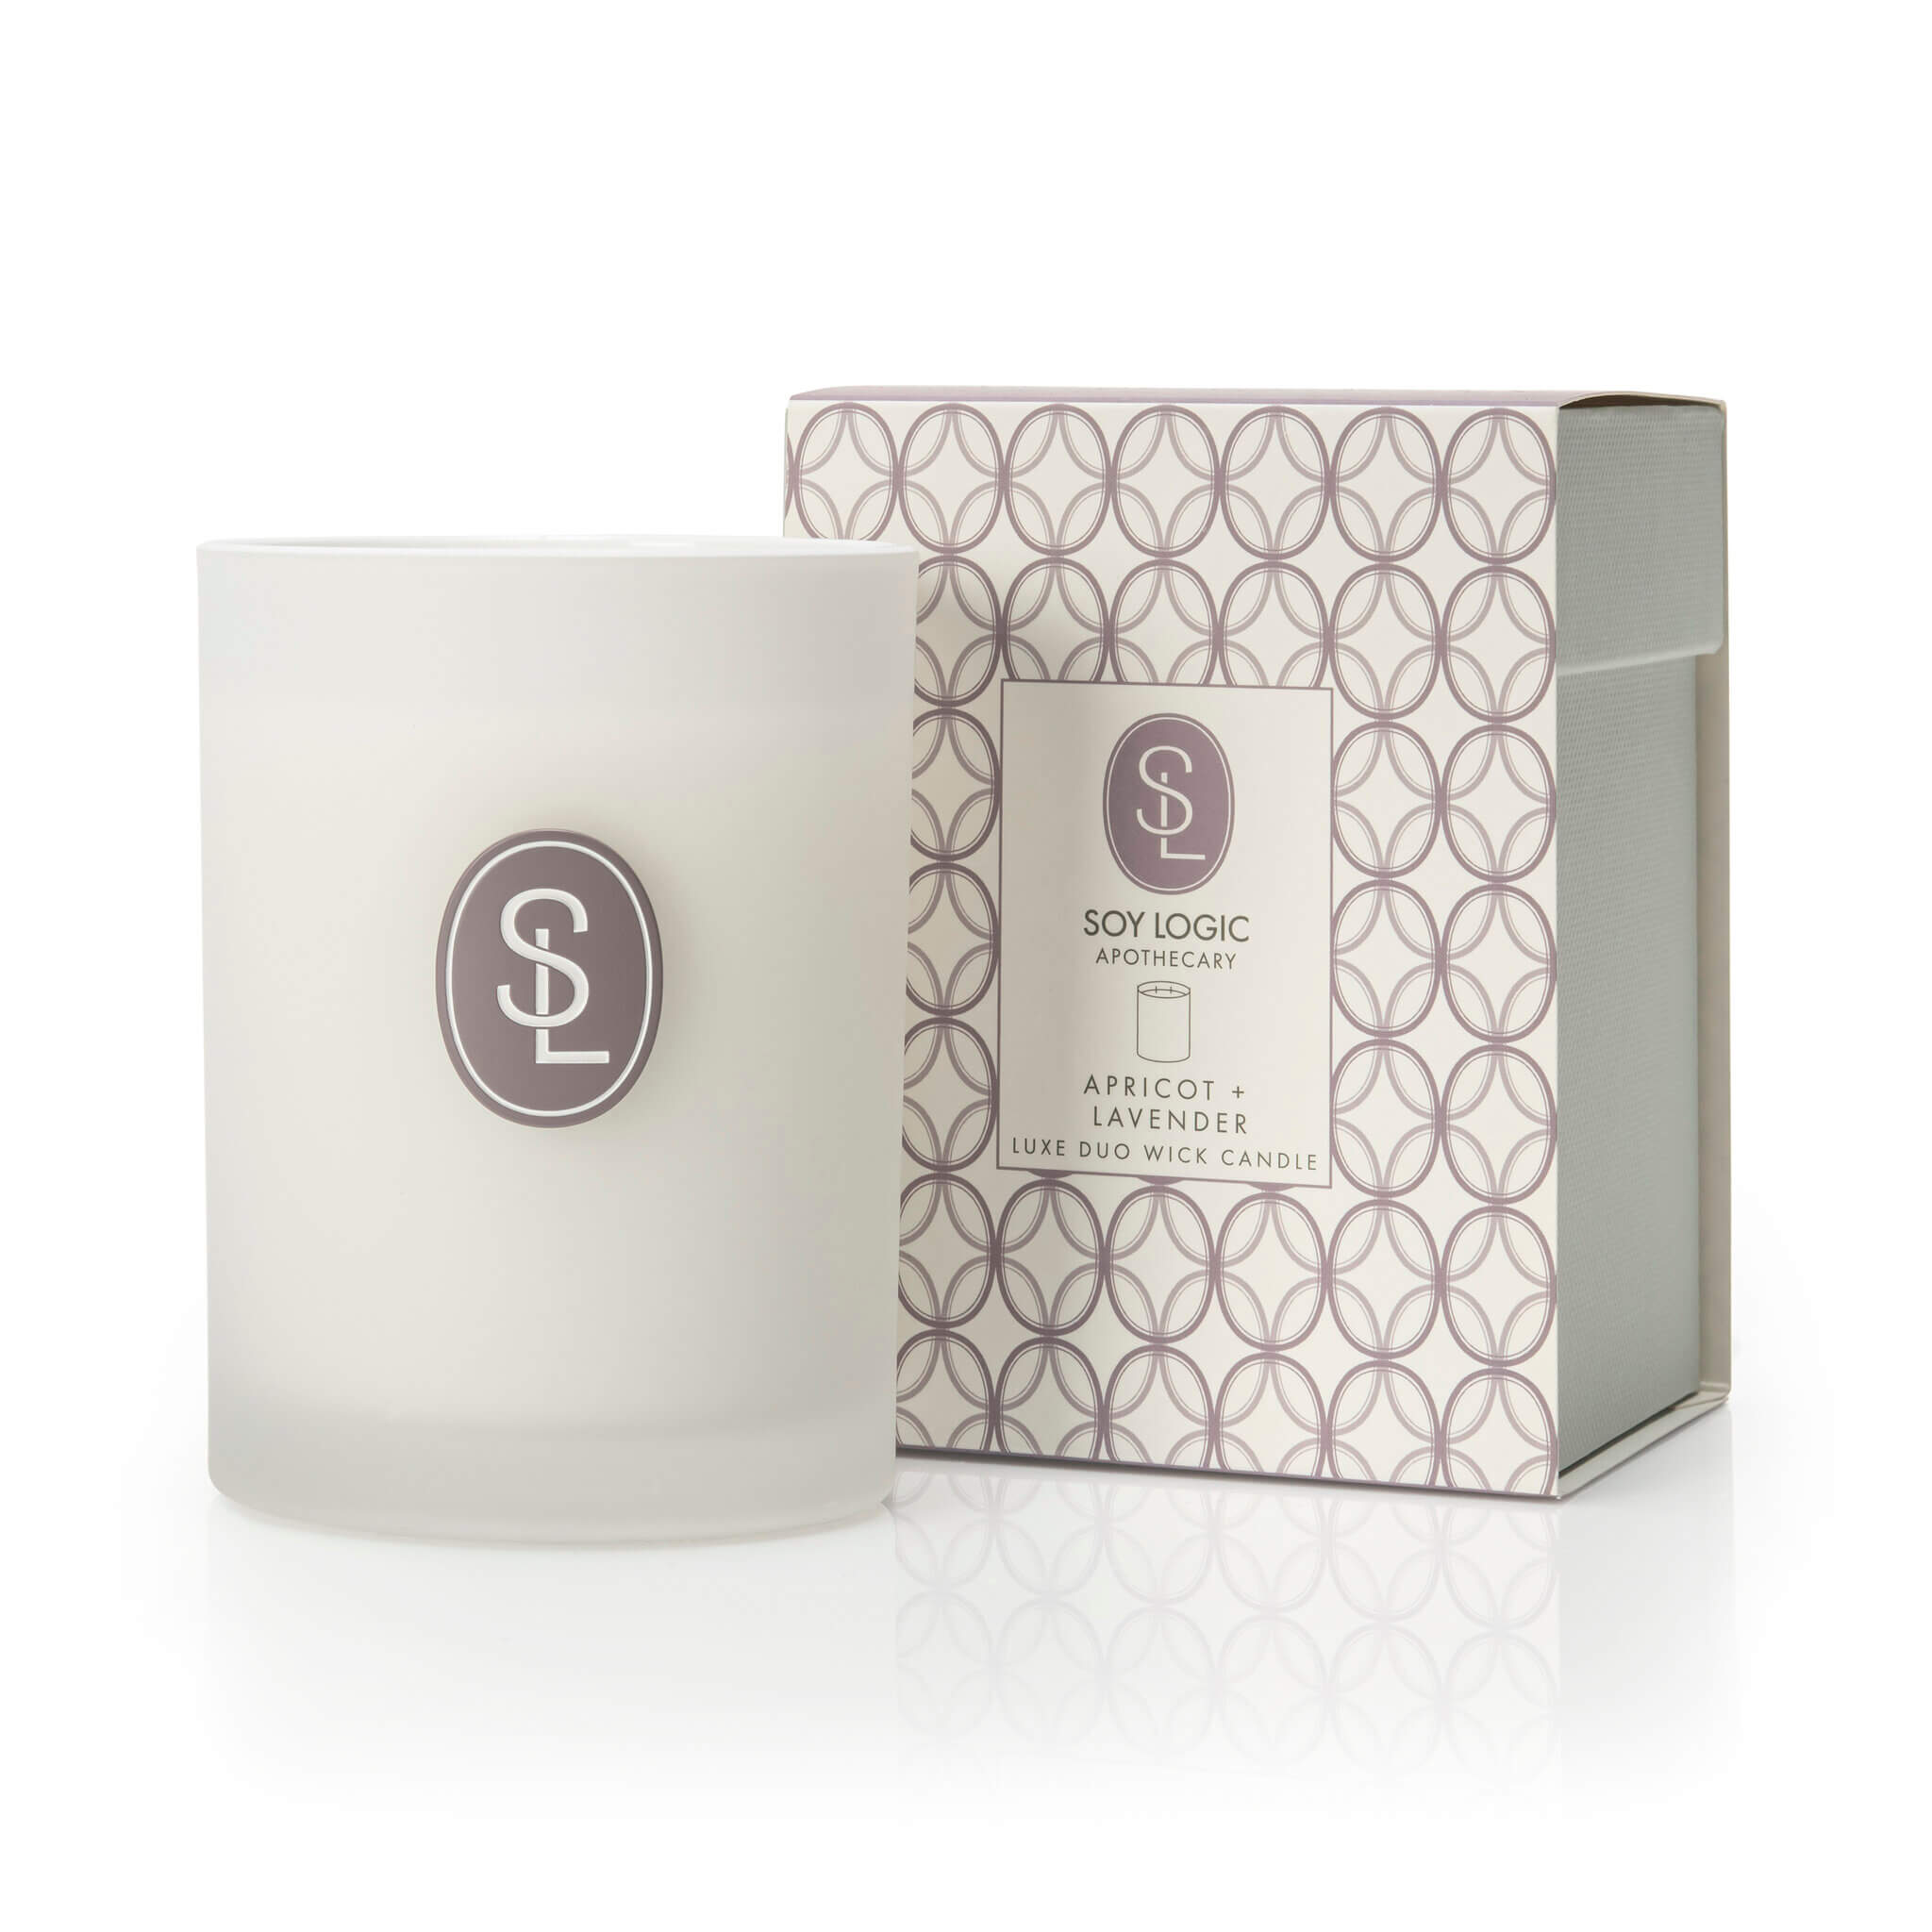 Apricot & Lavender Duo Wick Candle